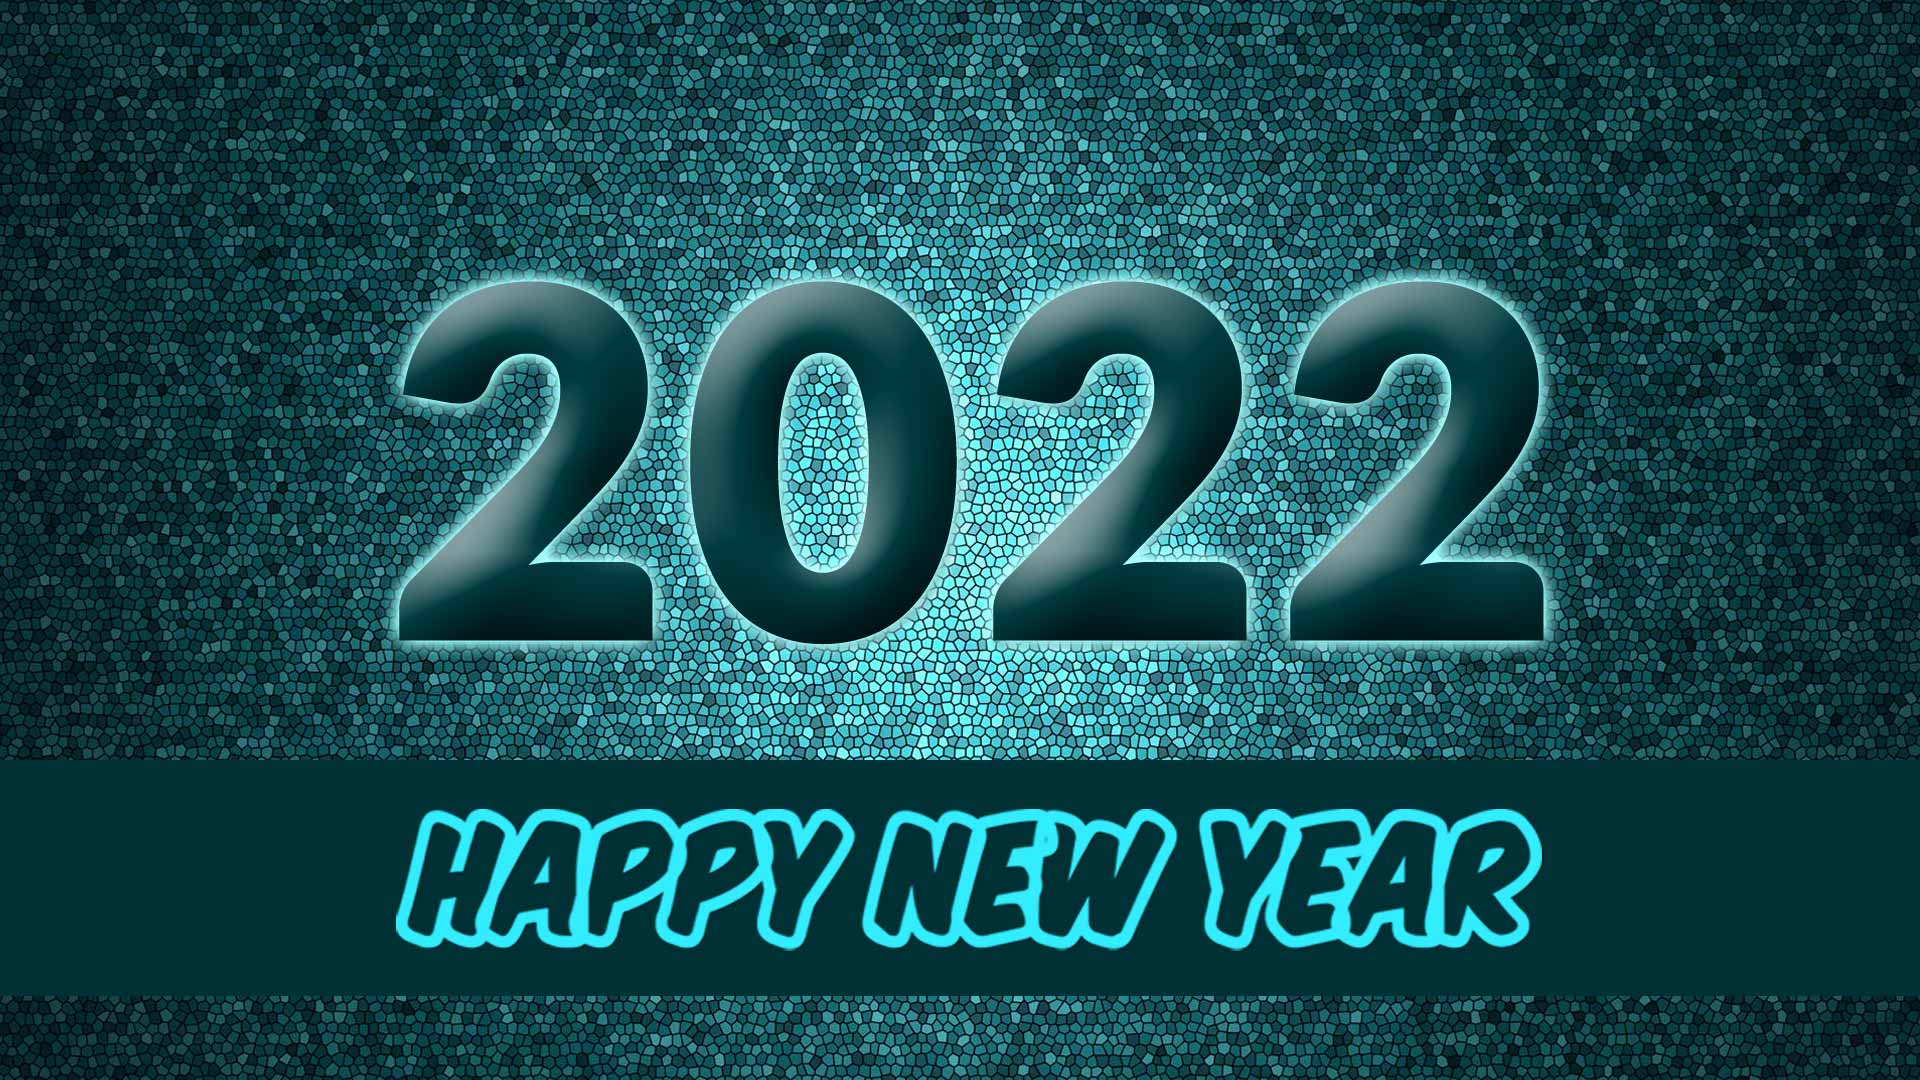 Happy New Year 2022 wallpaper full hd pc background pics download 1920x1080